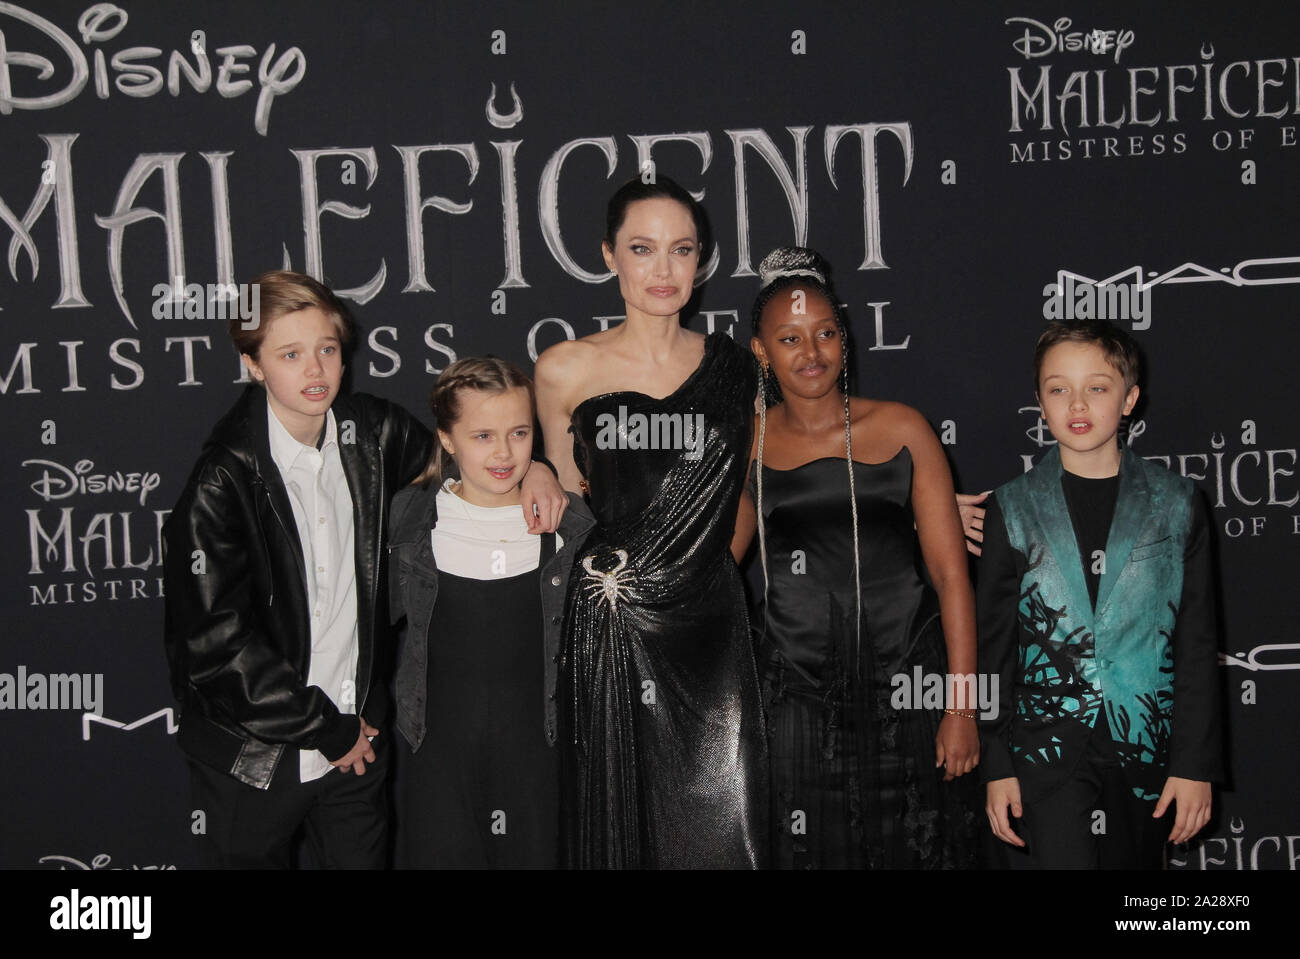 Shiloh Nouvel Jolie-Pitt, Vivienne Marcheline Jolie-Pitt, Angelina Jolie, Zahara Marley Jolie-Pitt, Knox Leon Jolie-Pitt  09/30/2019 The World Premiere of 'Maleficent: Mistress of Evil' held at the El CapitanTheatre in Los Angeles, CA. Photo by I. Hasegawa / HNW/PictureLux Stock Photo